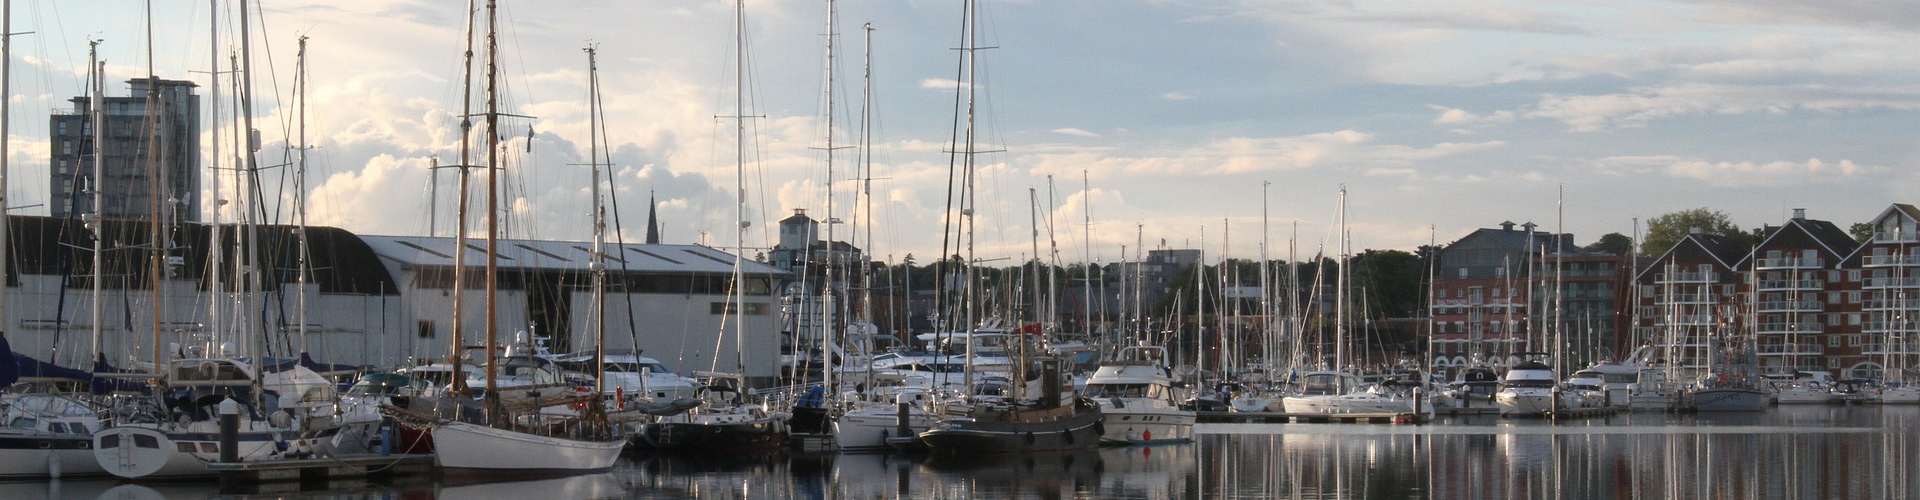 A marina with calm waters.